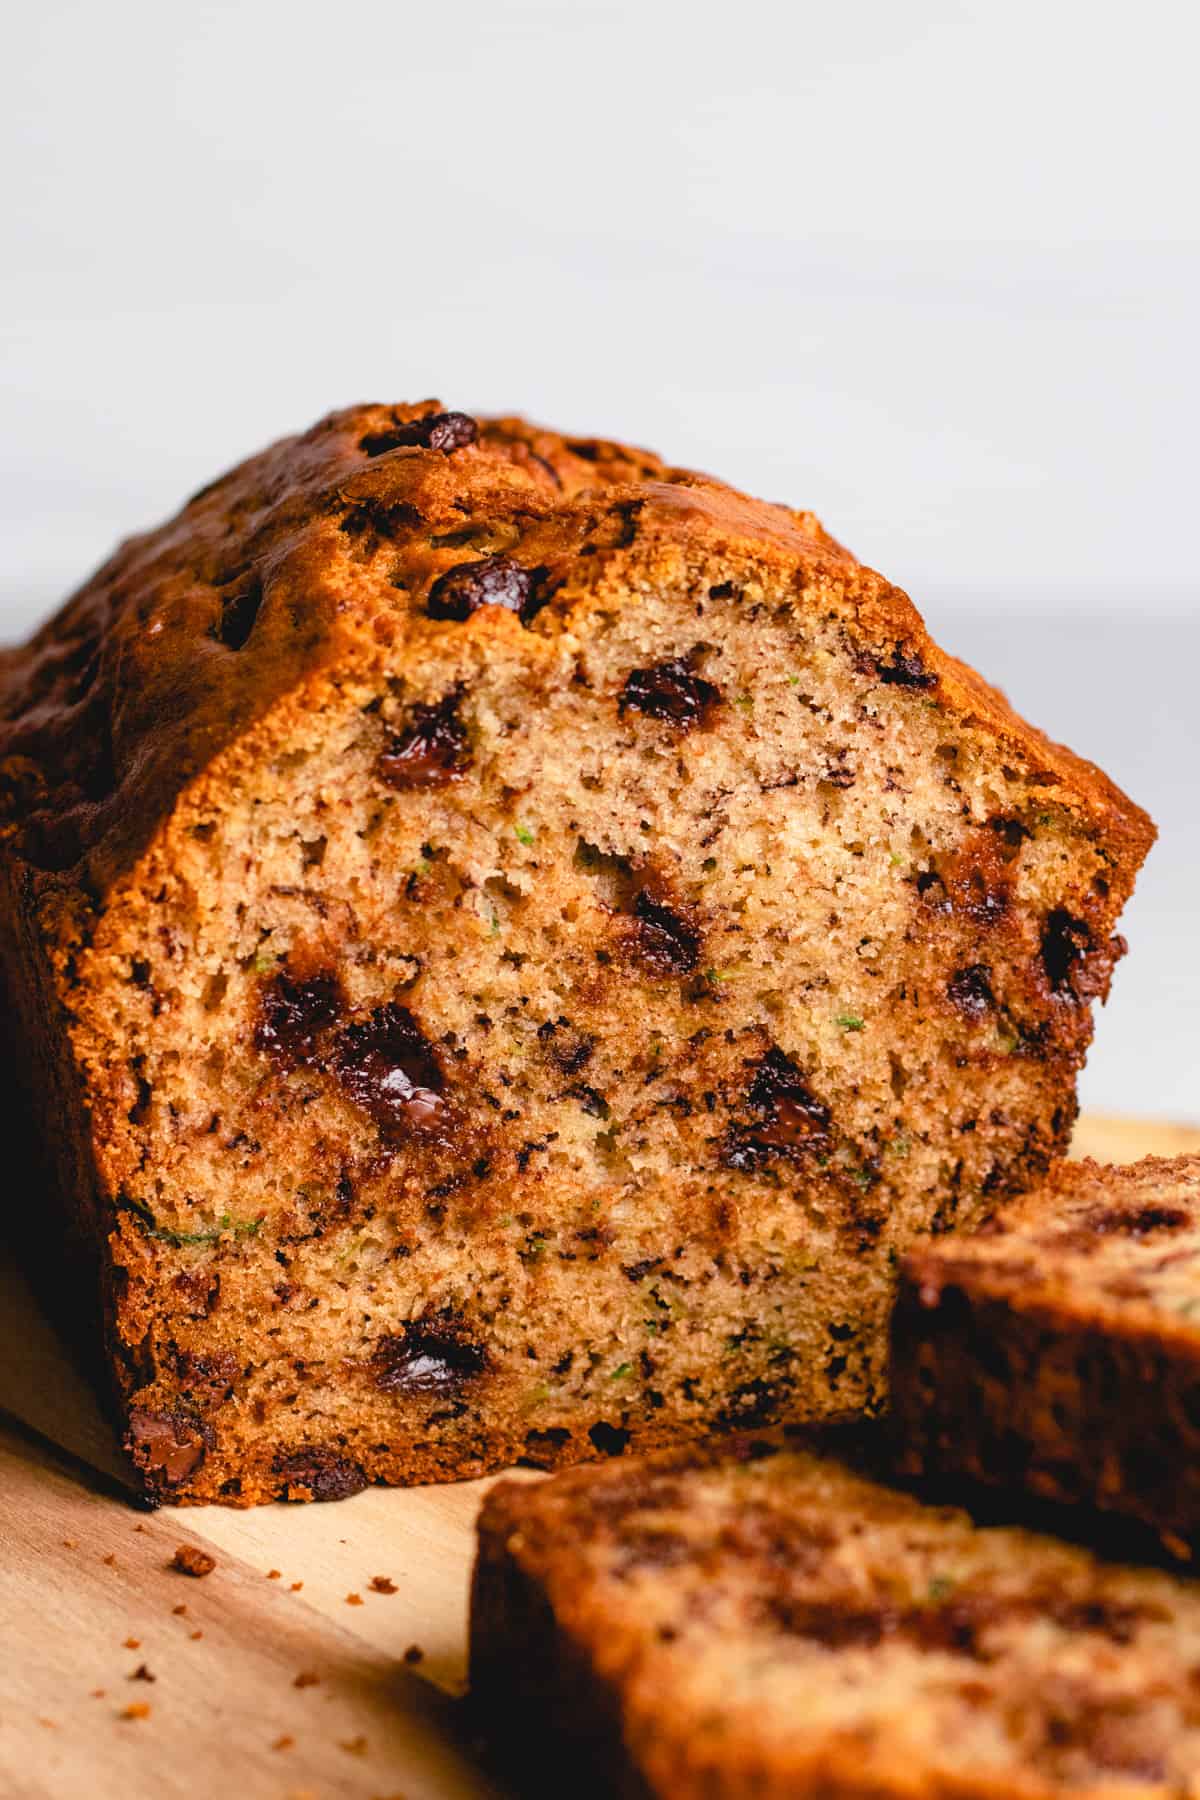 Sliced zucchini banana bread with chocolate chips.